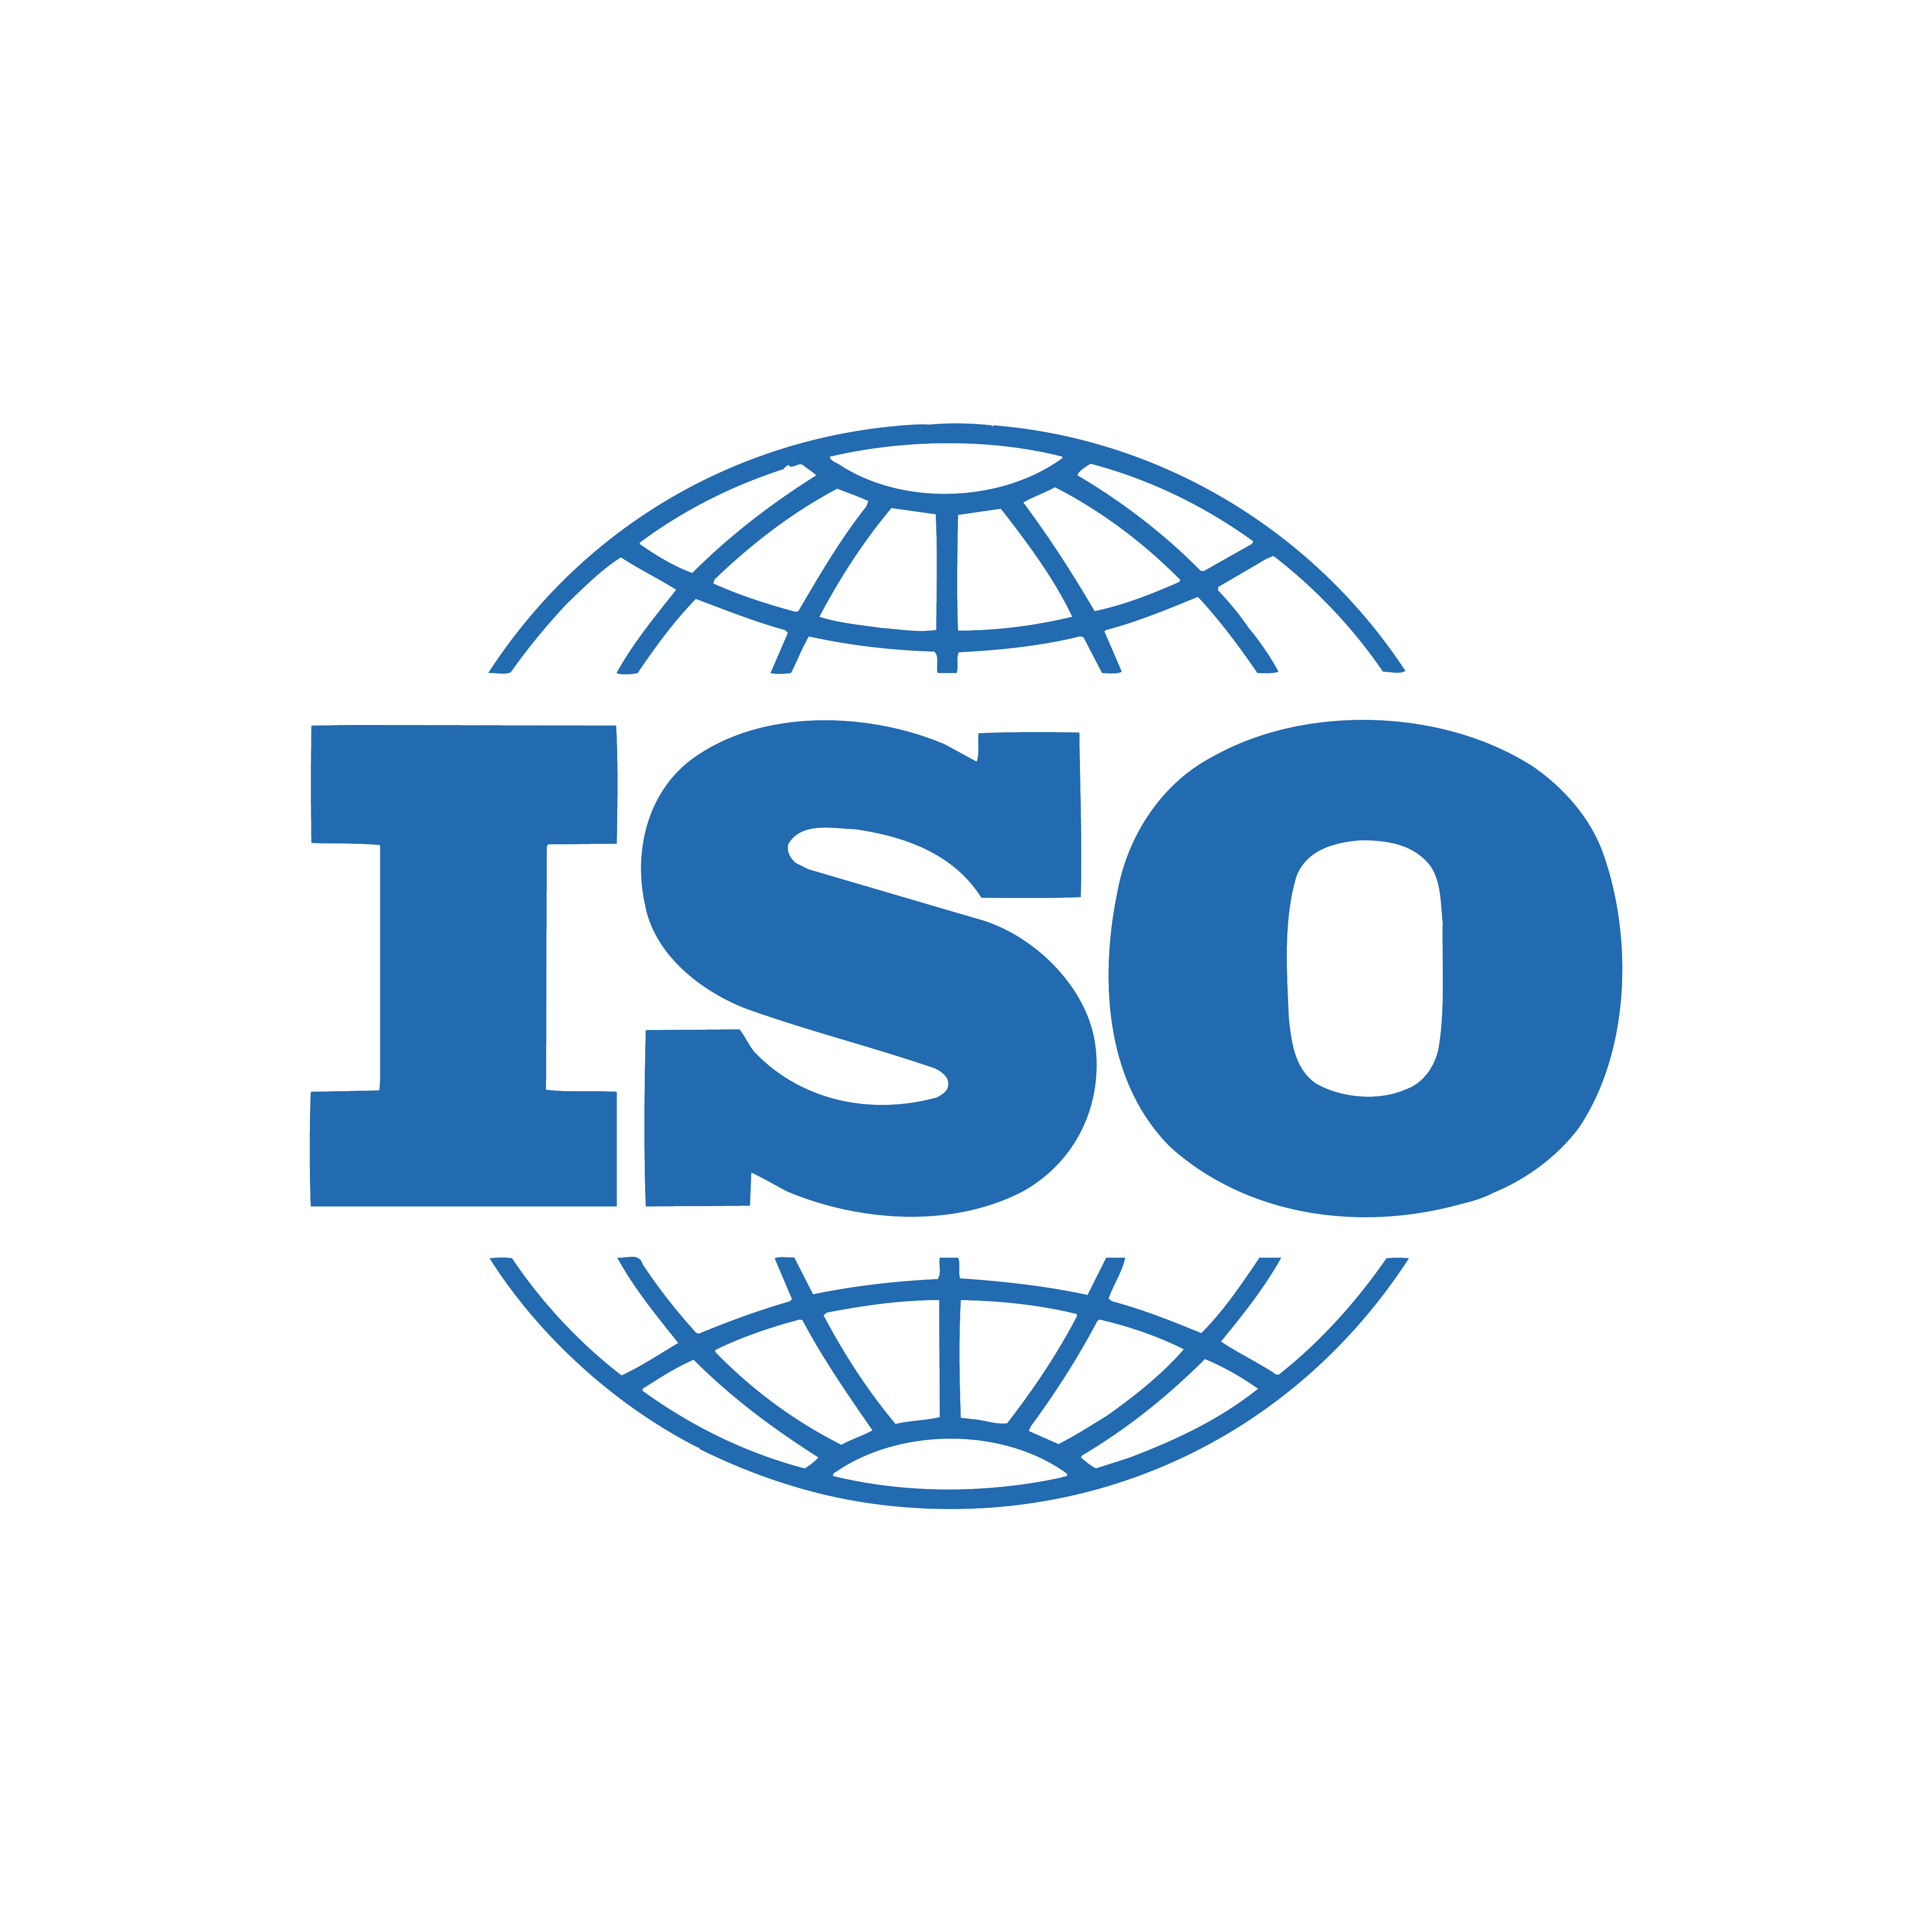 ISO Certification Consulting